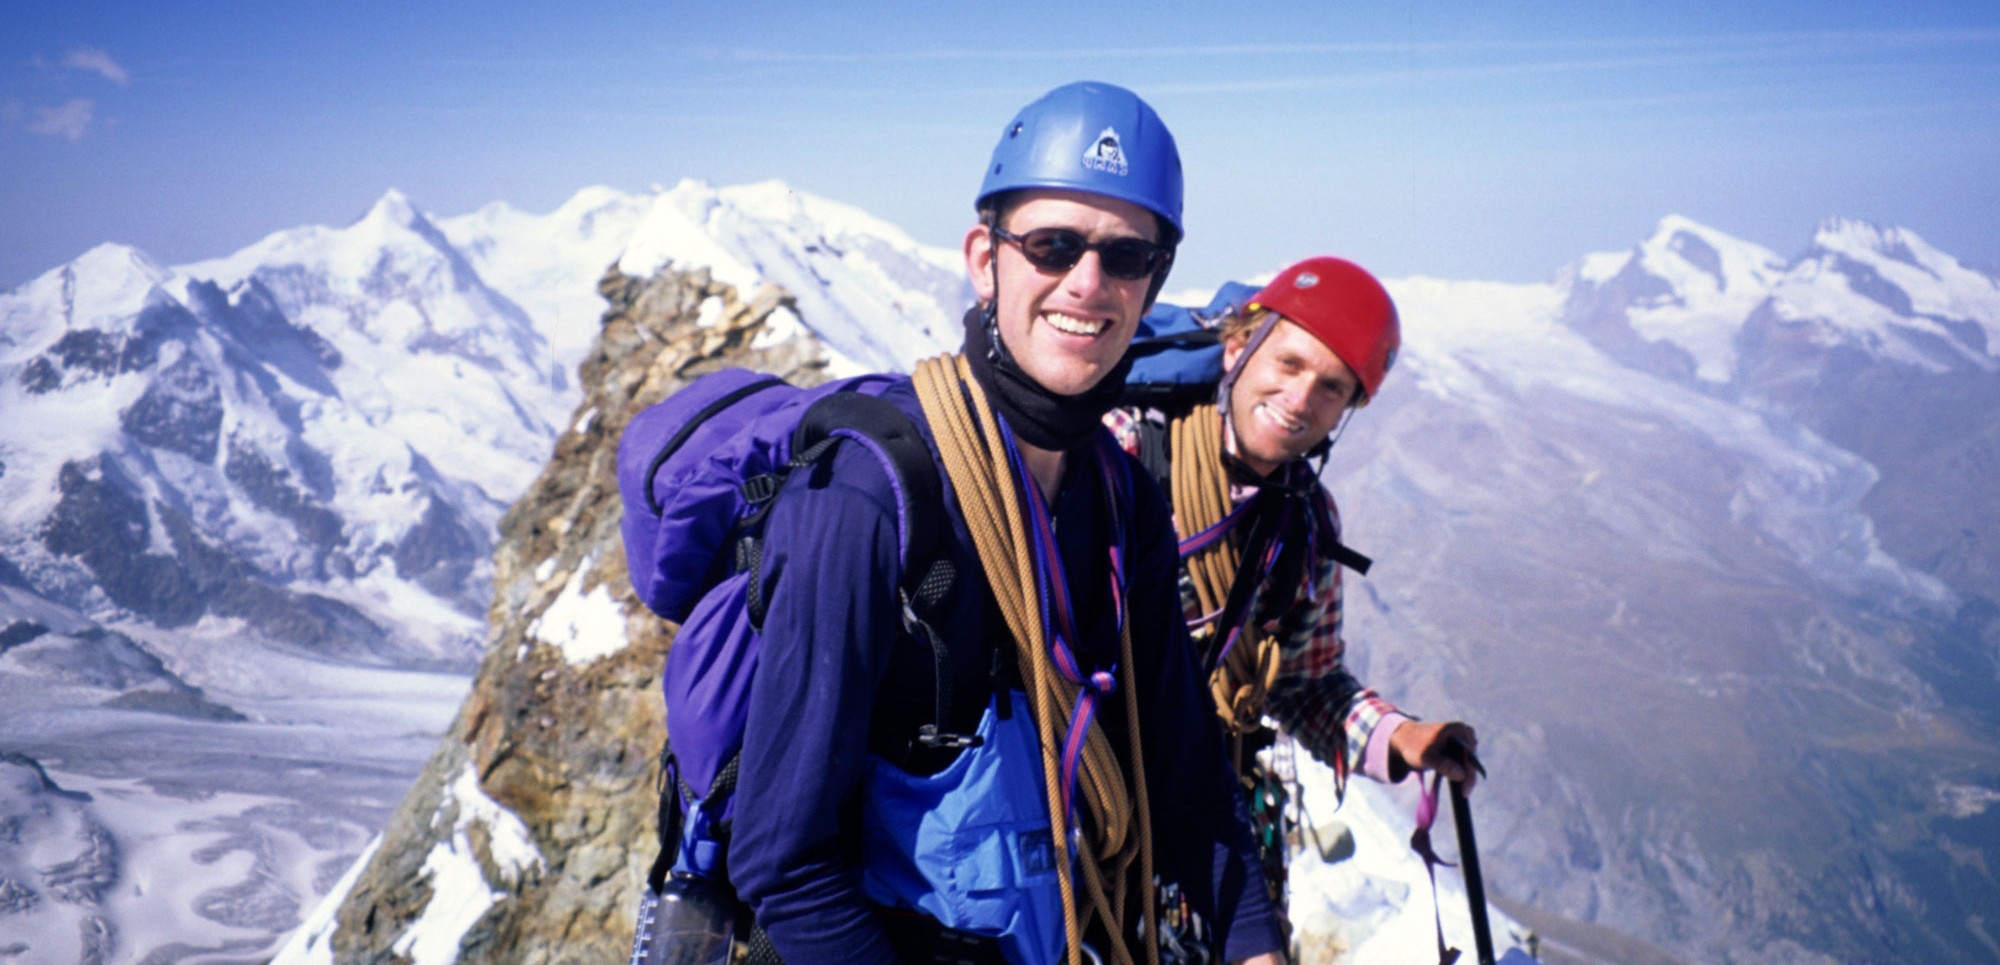 Geoffrey Stanford and Tom Clowes on the summit of the Matterhorn